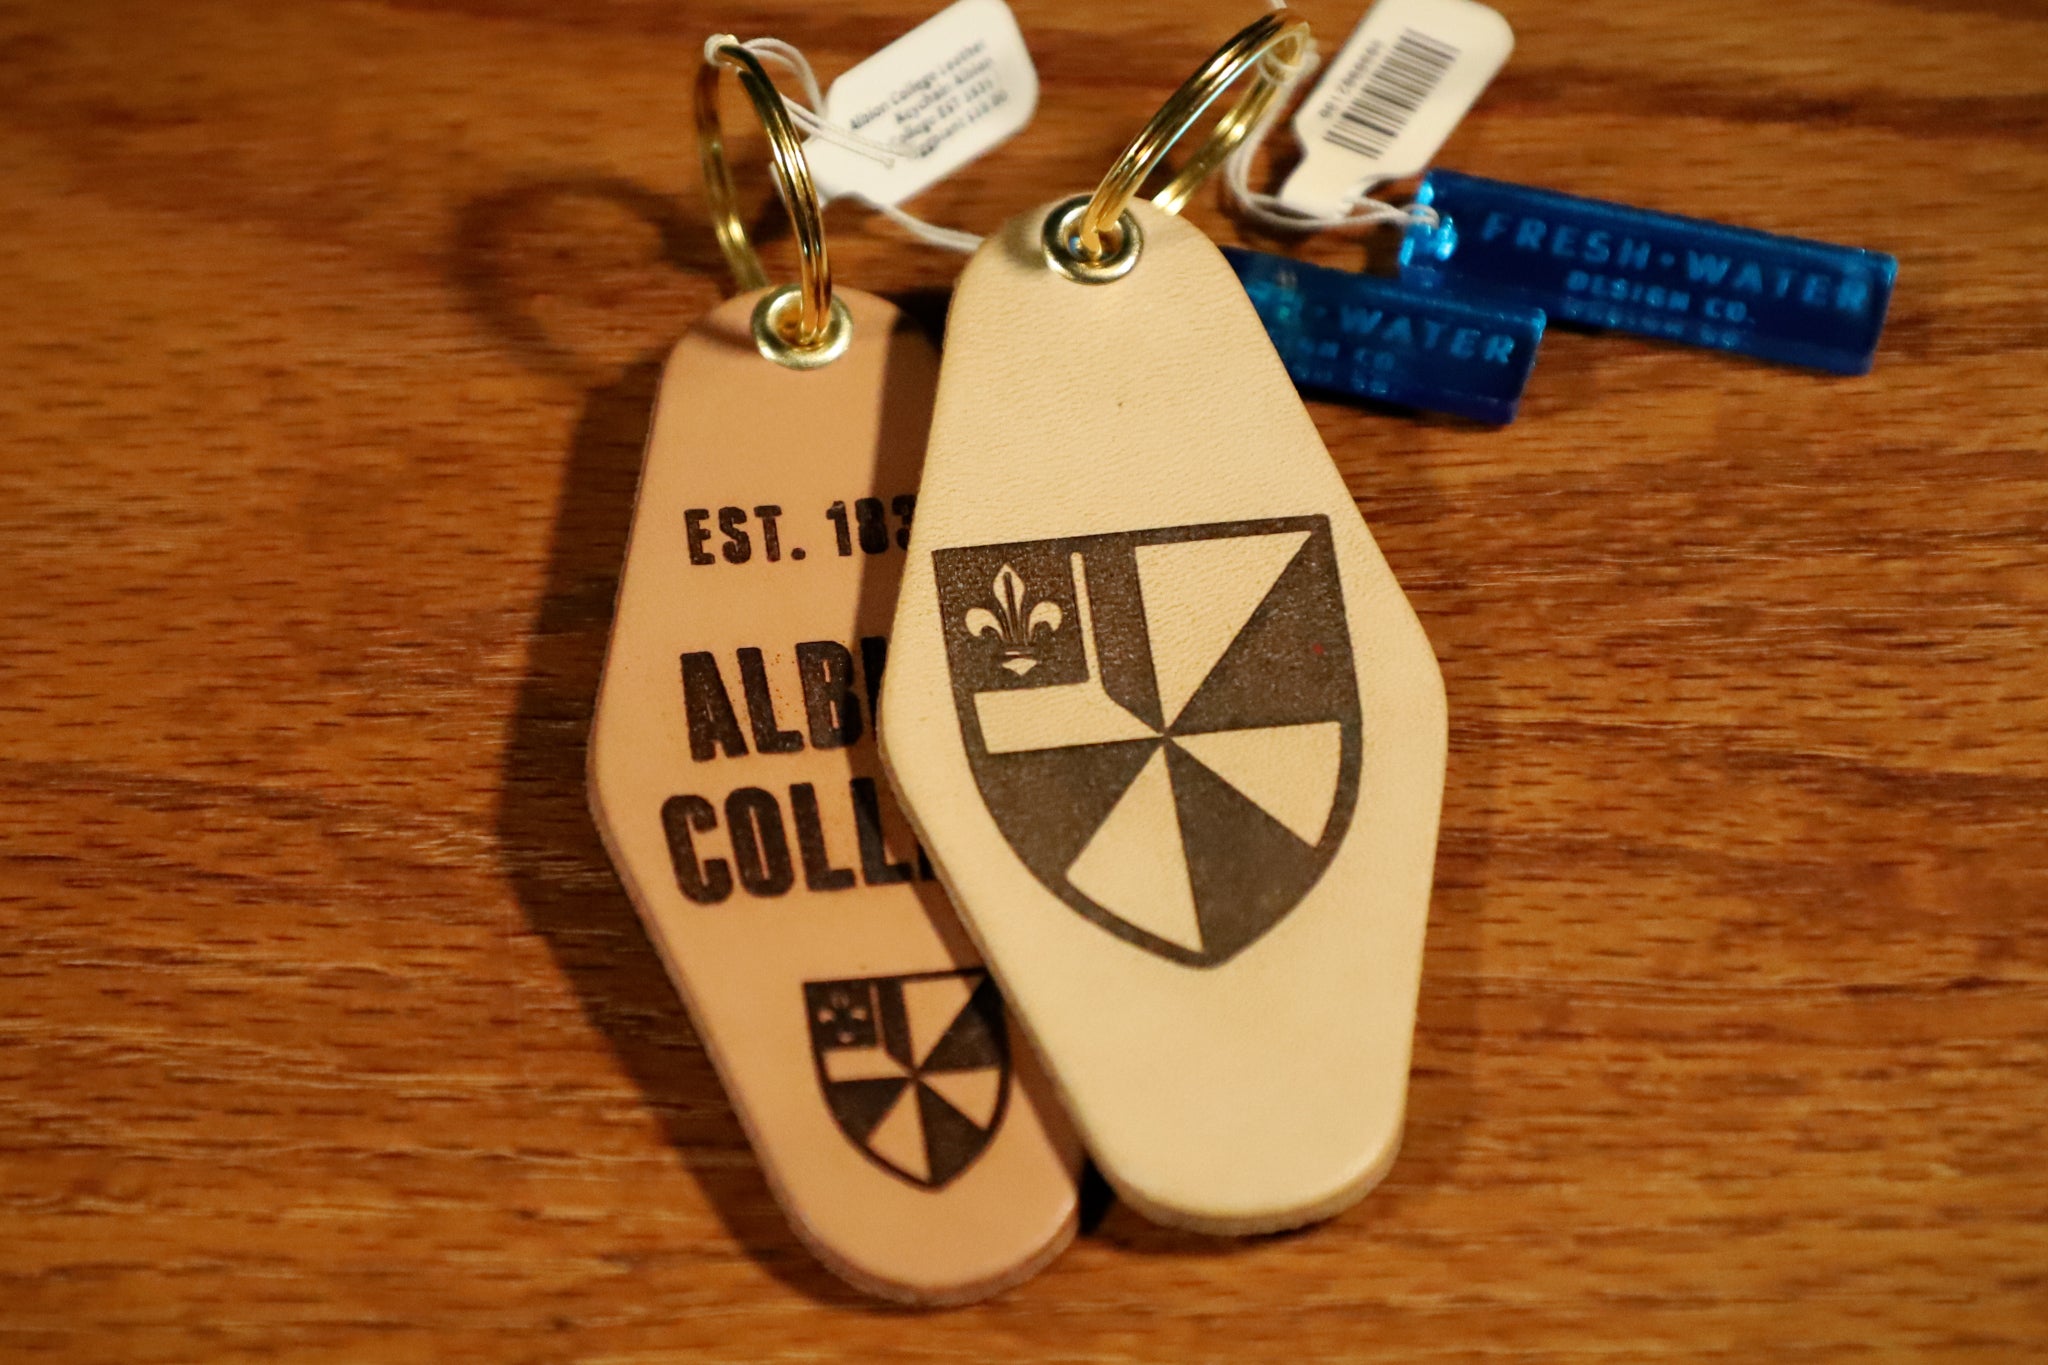 Albion College Leather Keychain